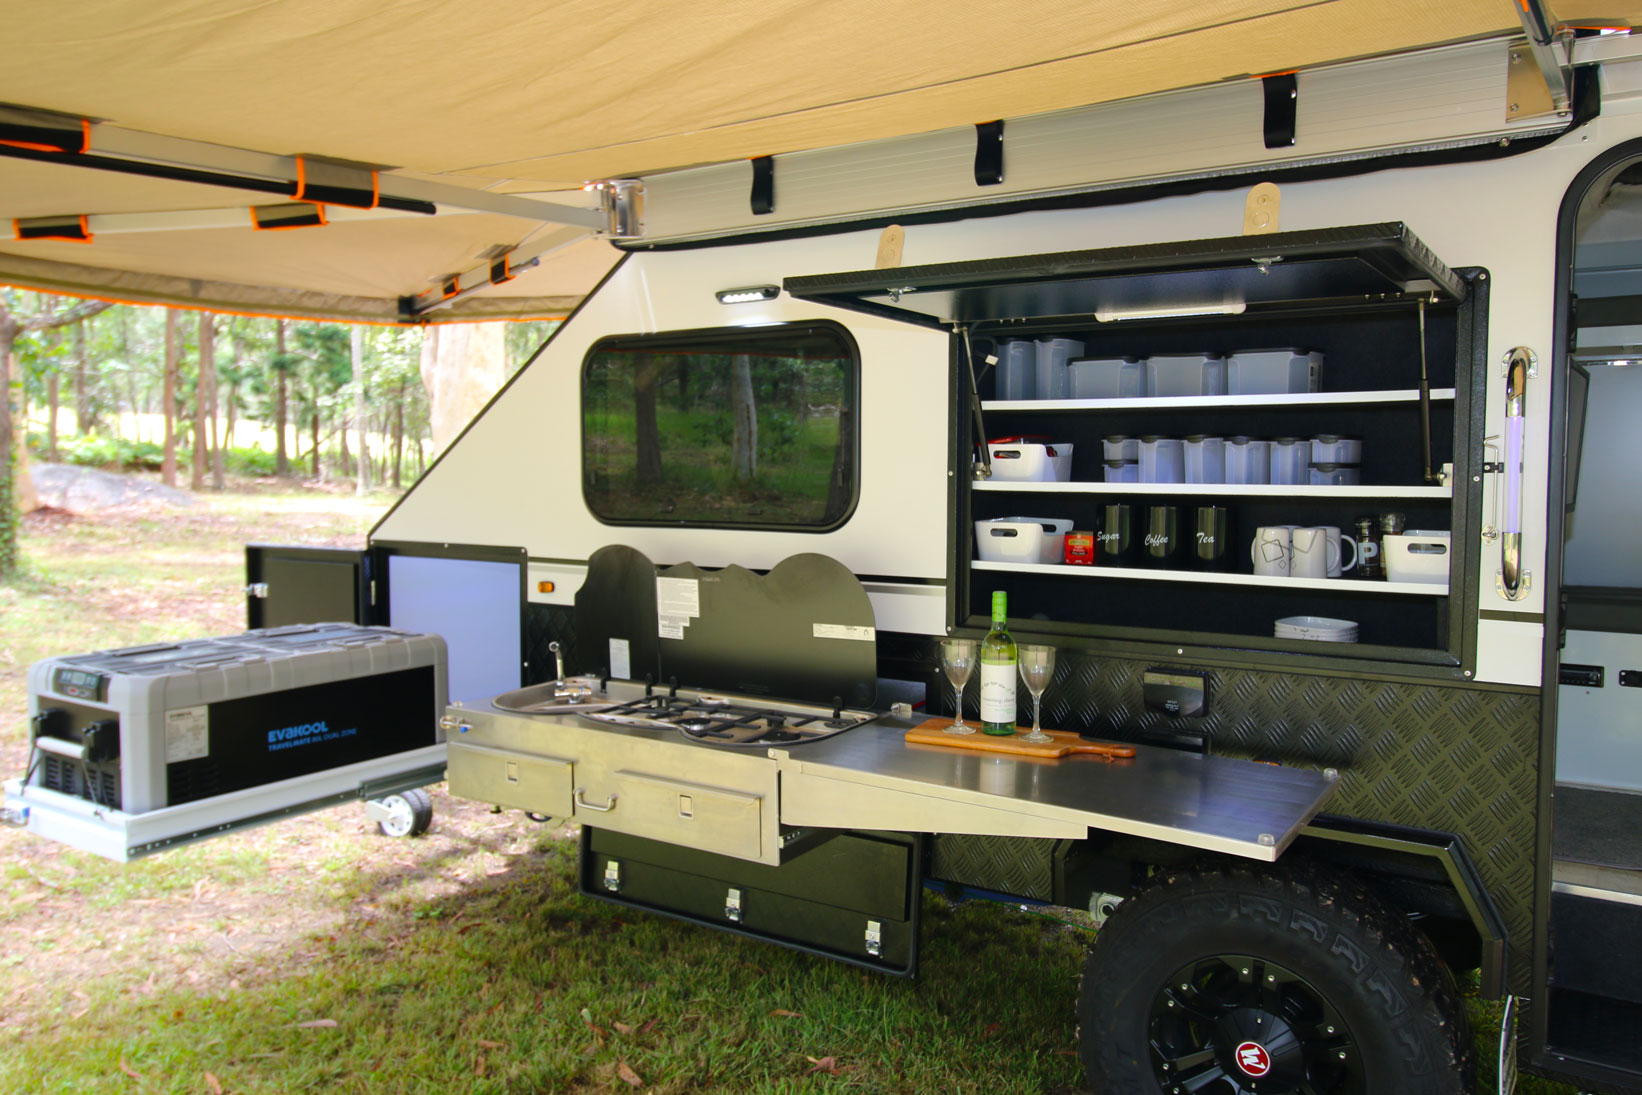 Modcon RV off road hybrid camper trailers C3P under awning